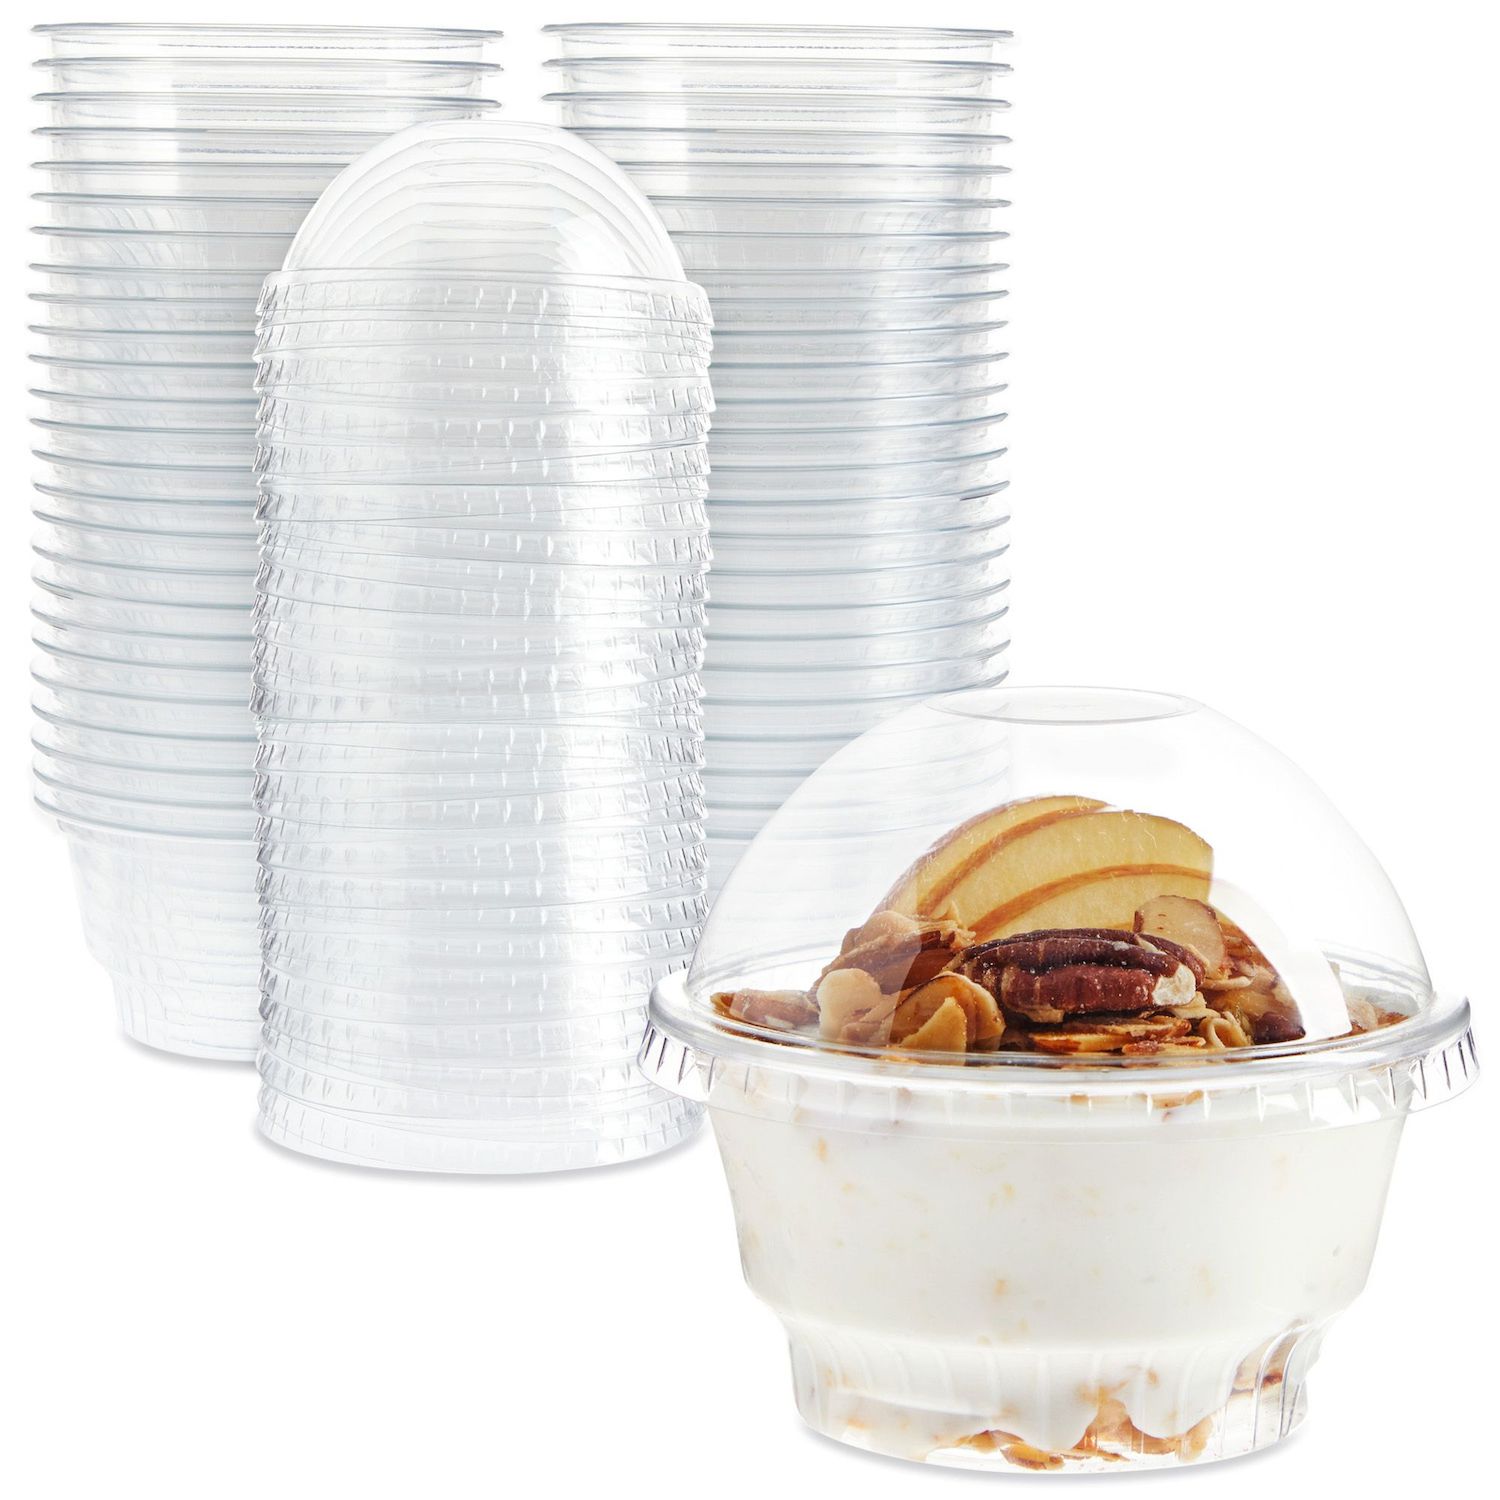 Zulay Kitchen Ice Cream Containers 2 Pack - 1 Quart Blue